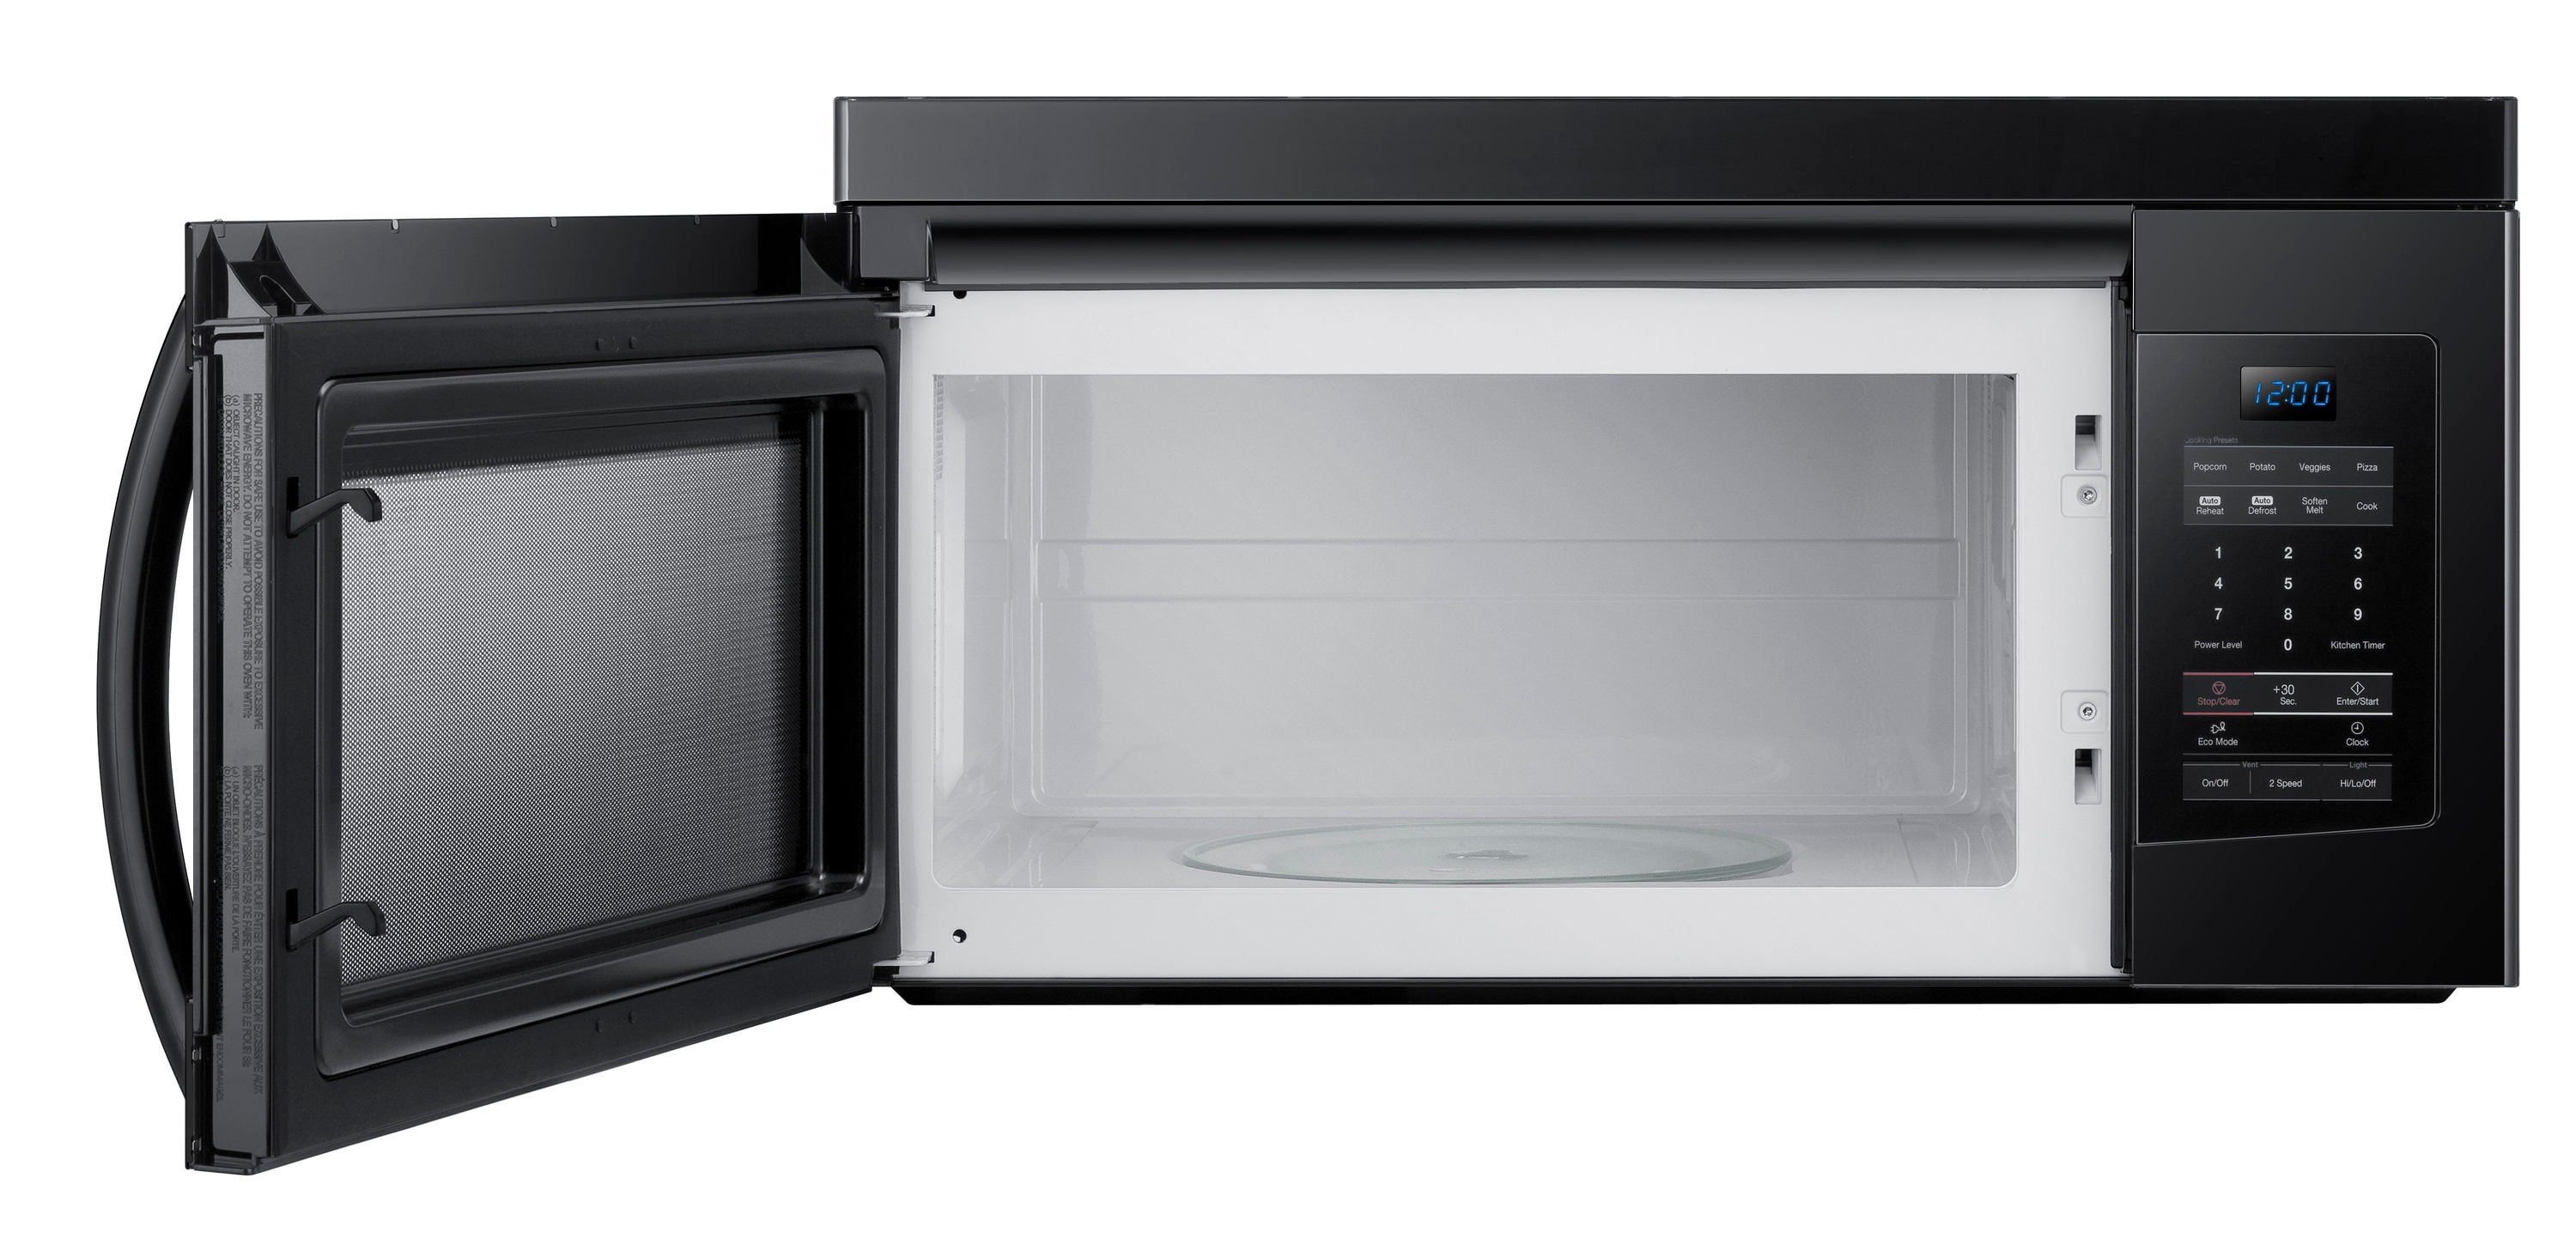 Samsung 1.6-cu ft 1000-Watt Over-the-Range Microwave with Sensor Cooking  (Black) at